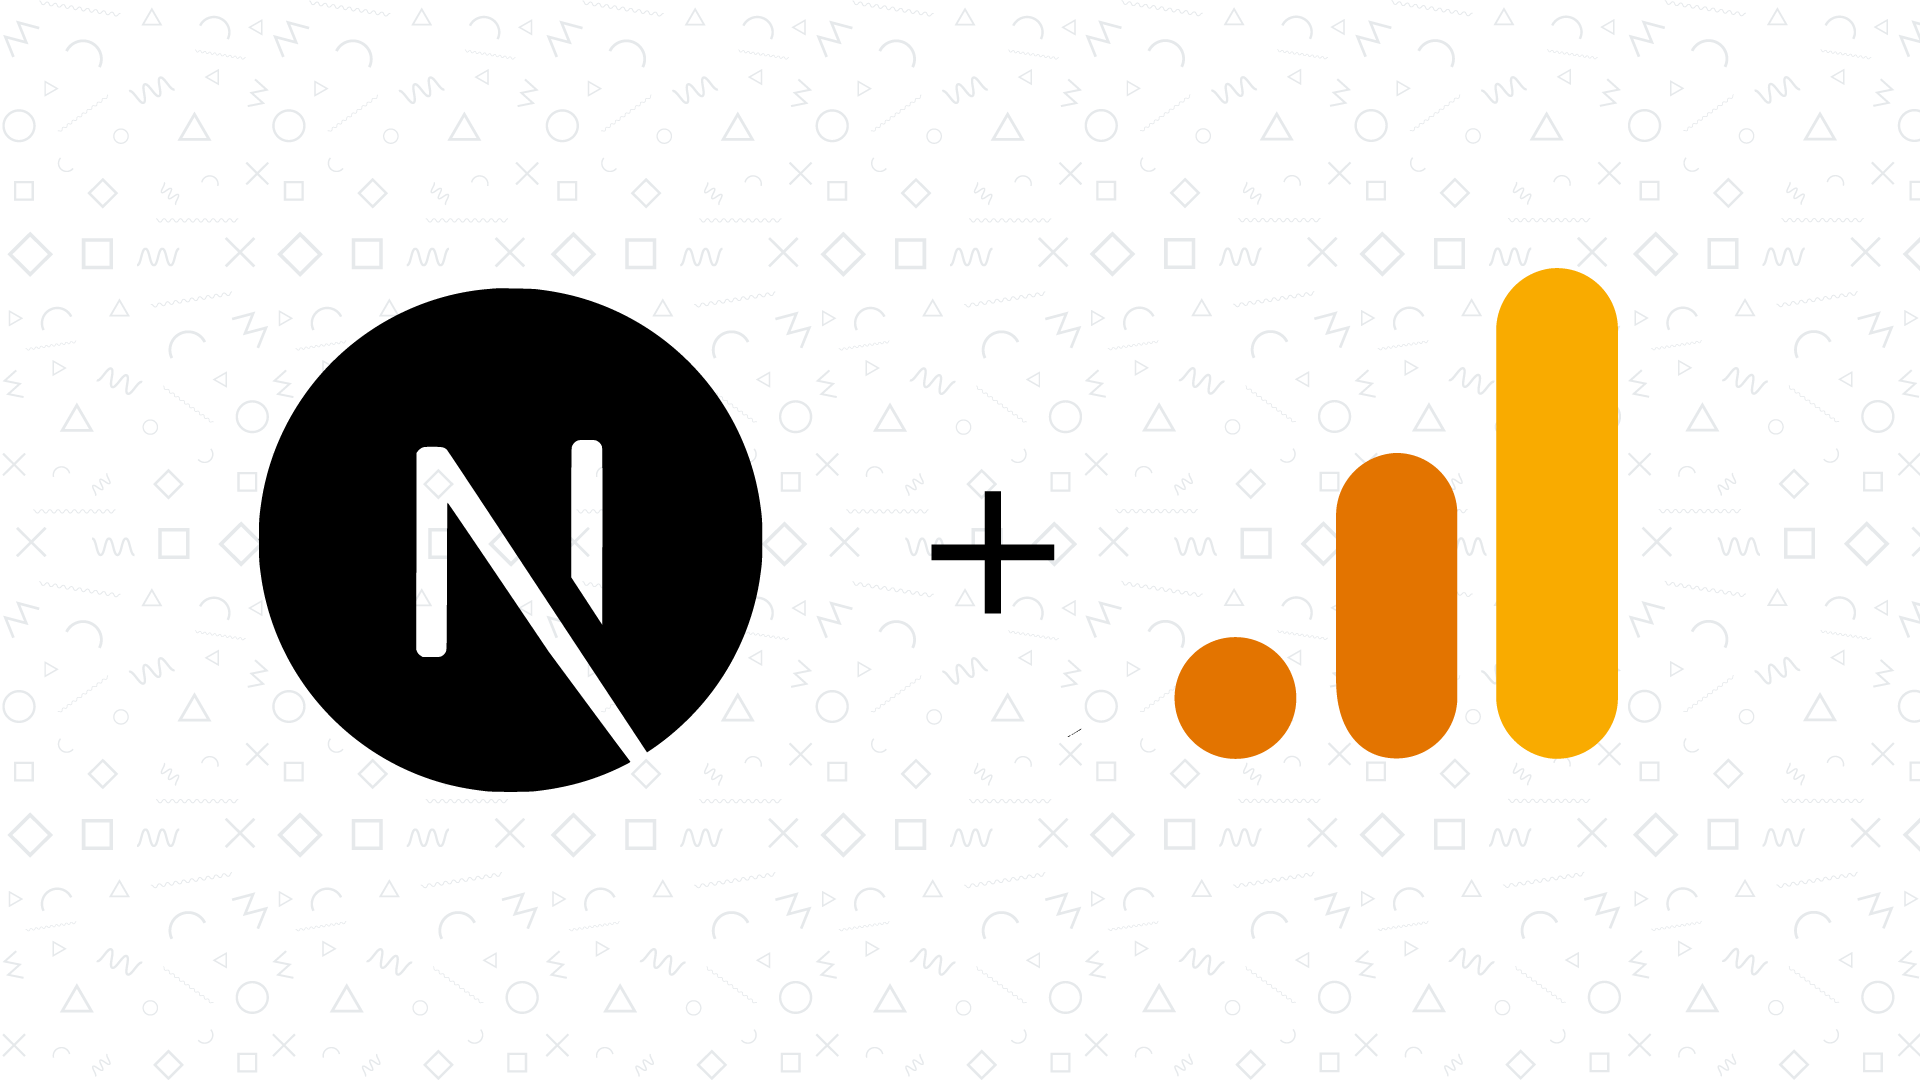 Track & show page views with Next.js and Google Analytics